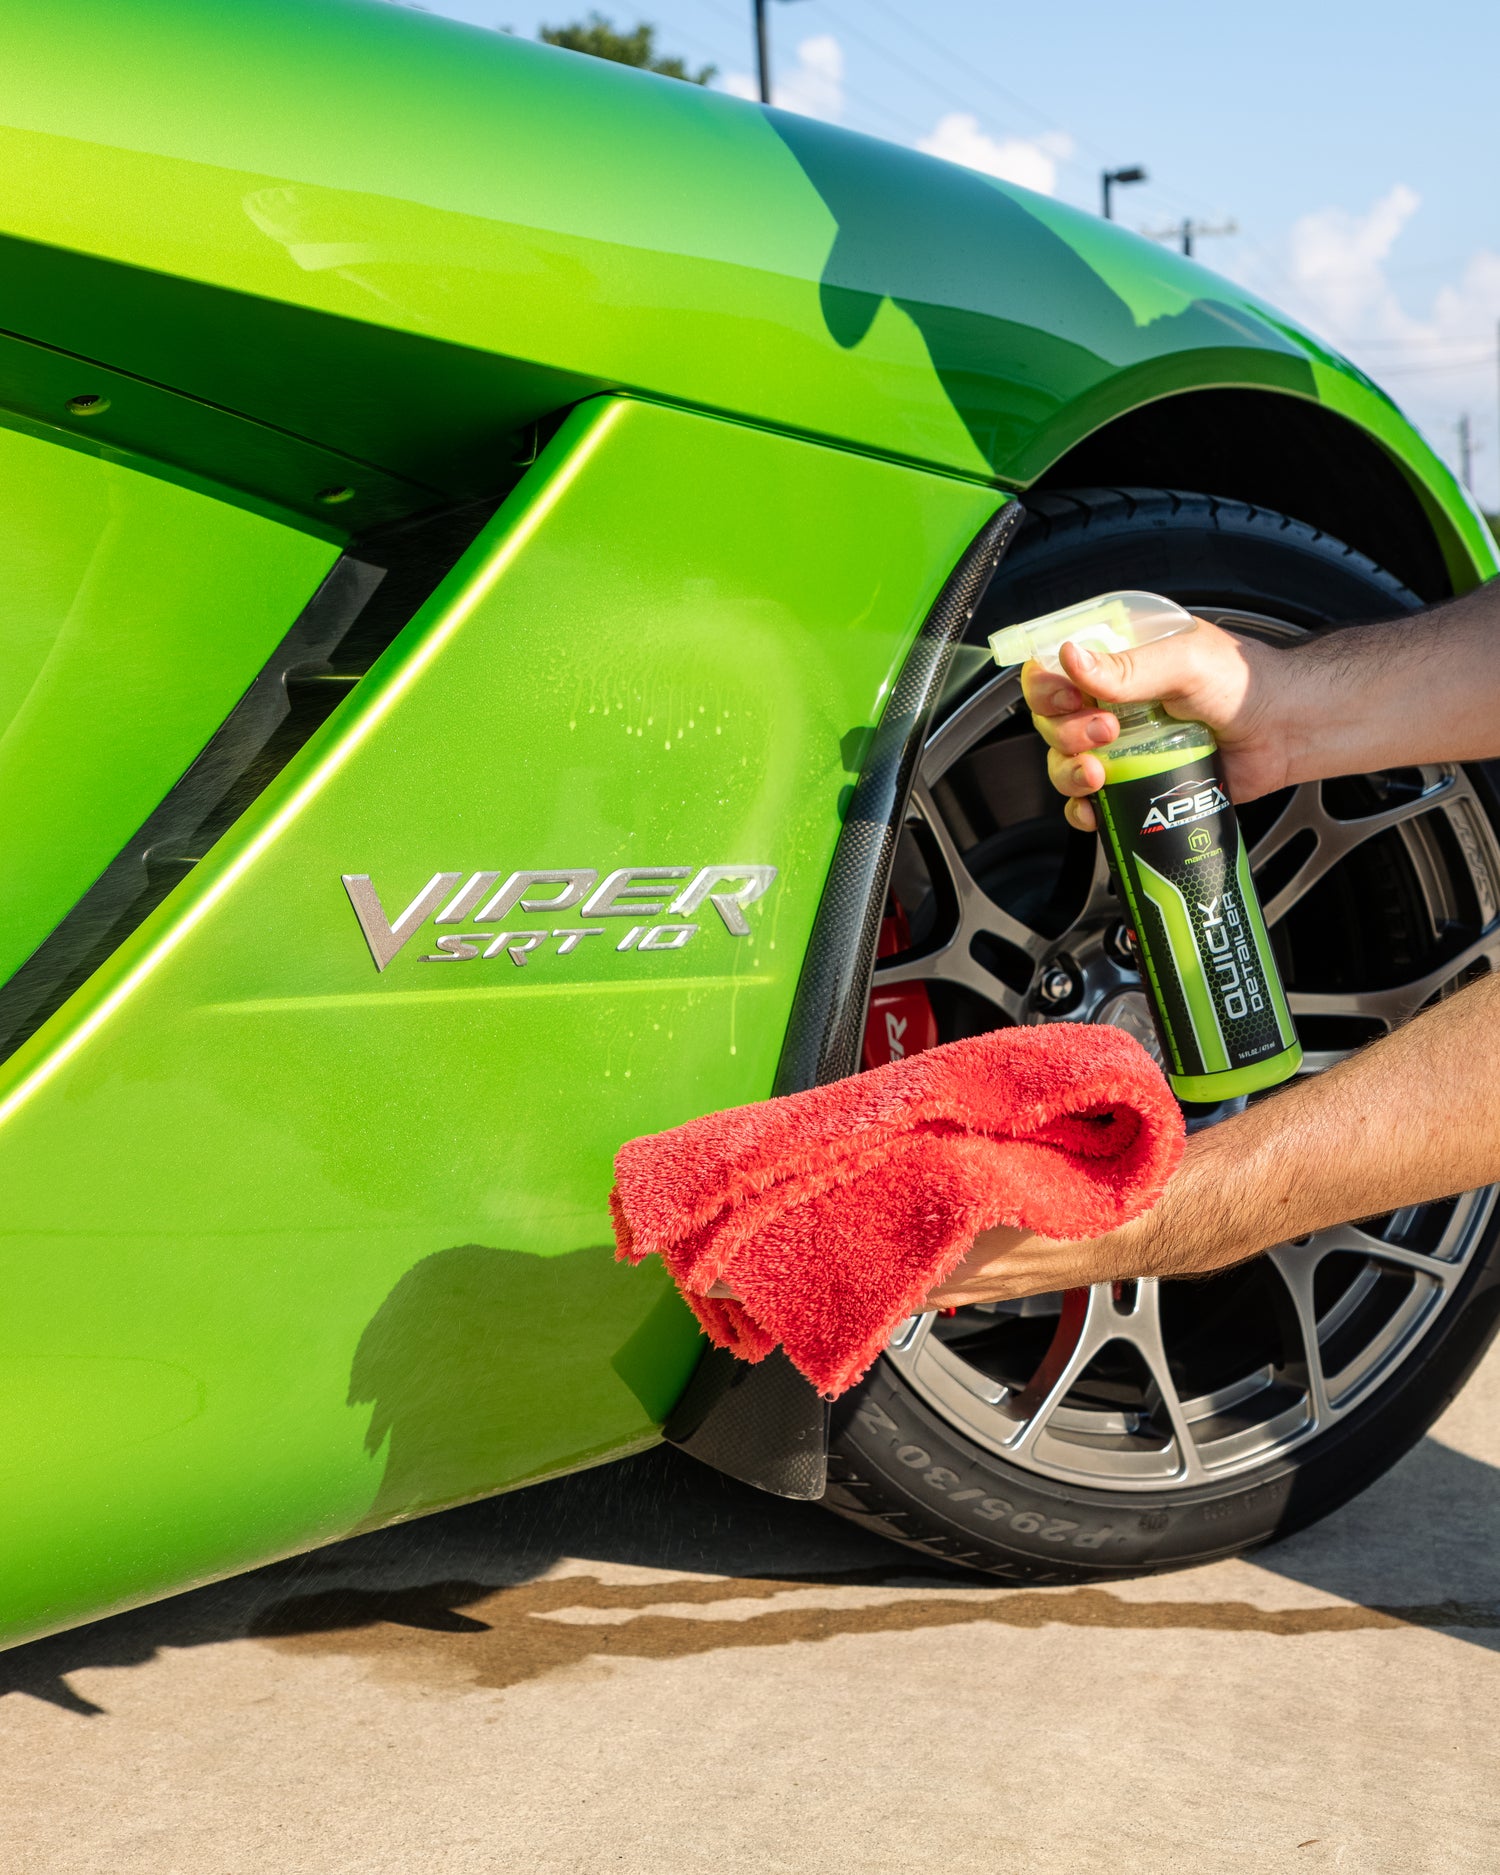 APEX Auto Products Quick Detailer being sprayed on green Dodge Viper with microfiber